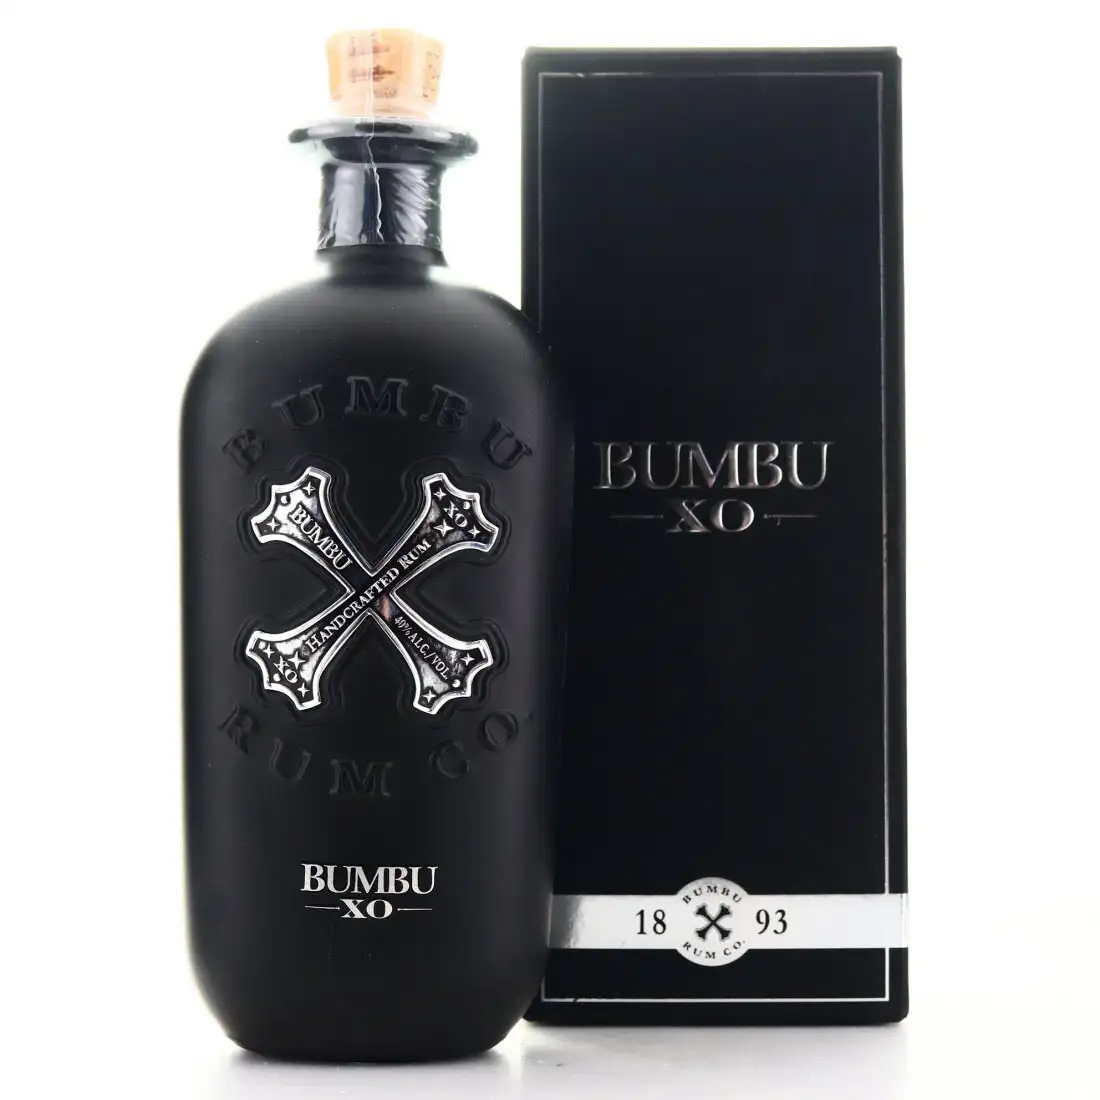 Image of the front of the bottle of the rum Bumbu XO